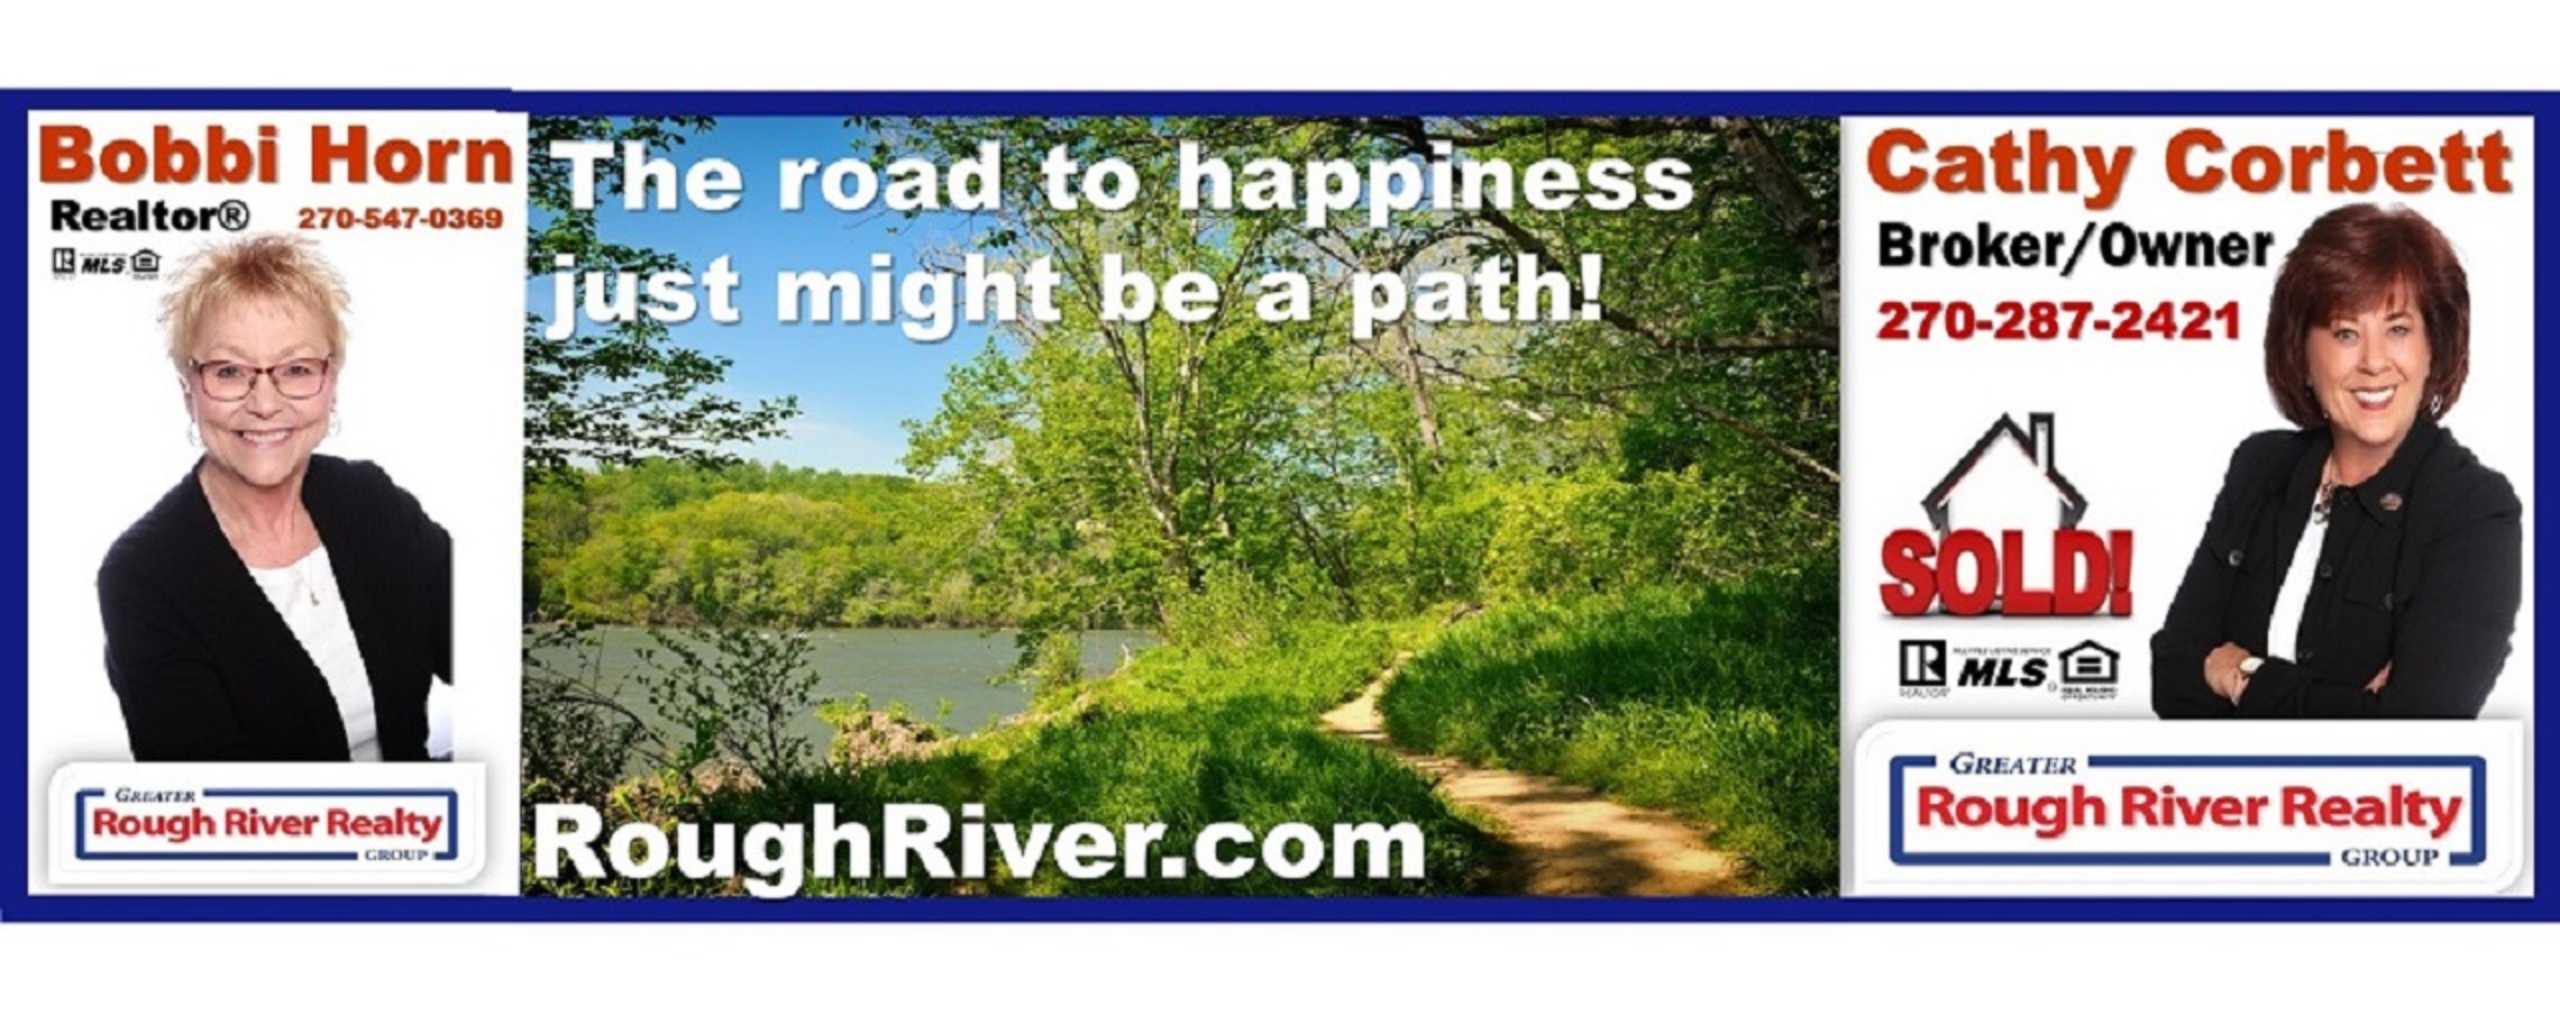 Your road to happiness is a lake path!